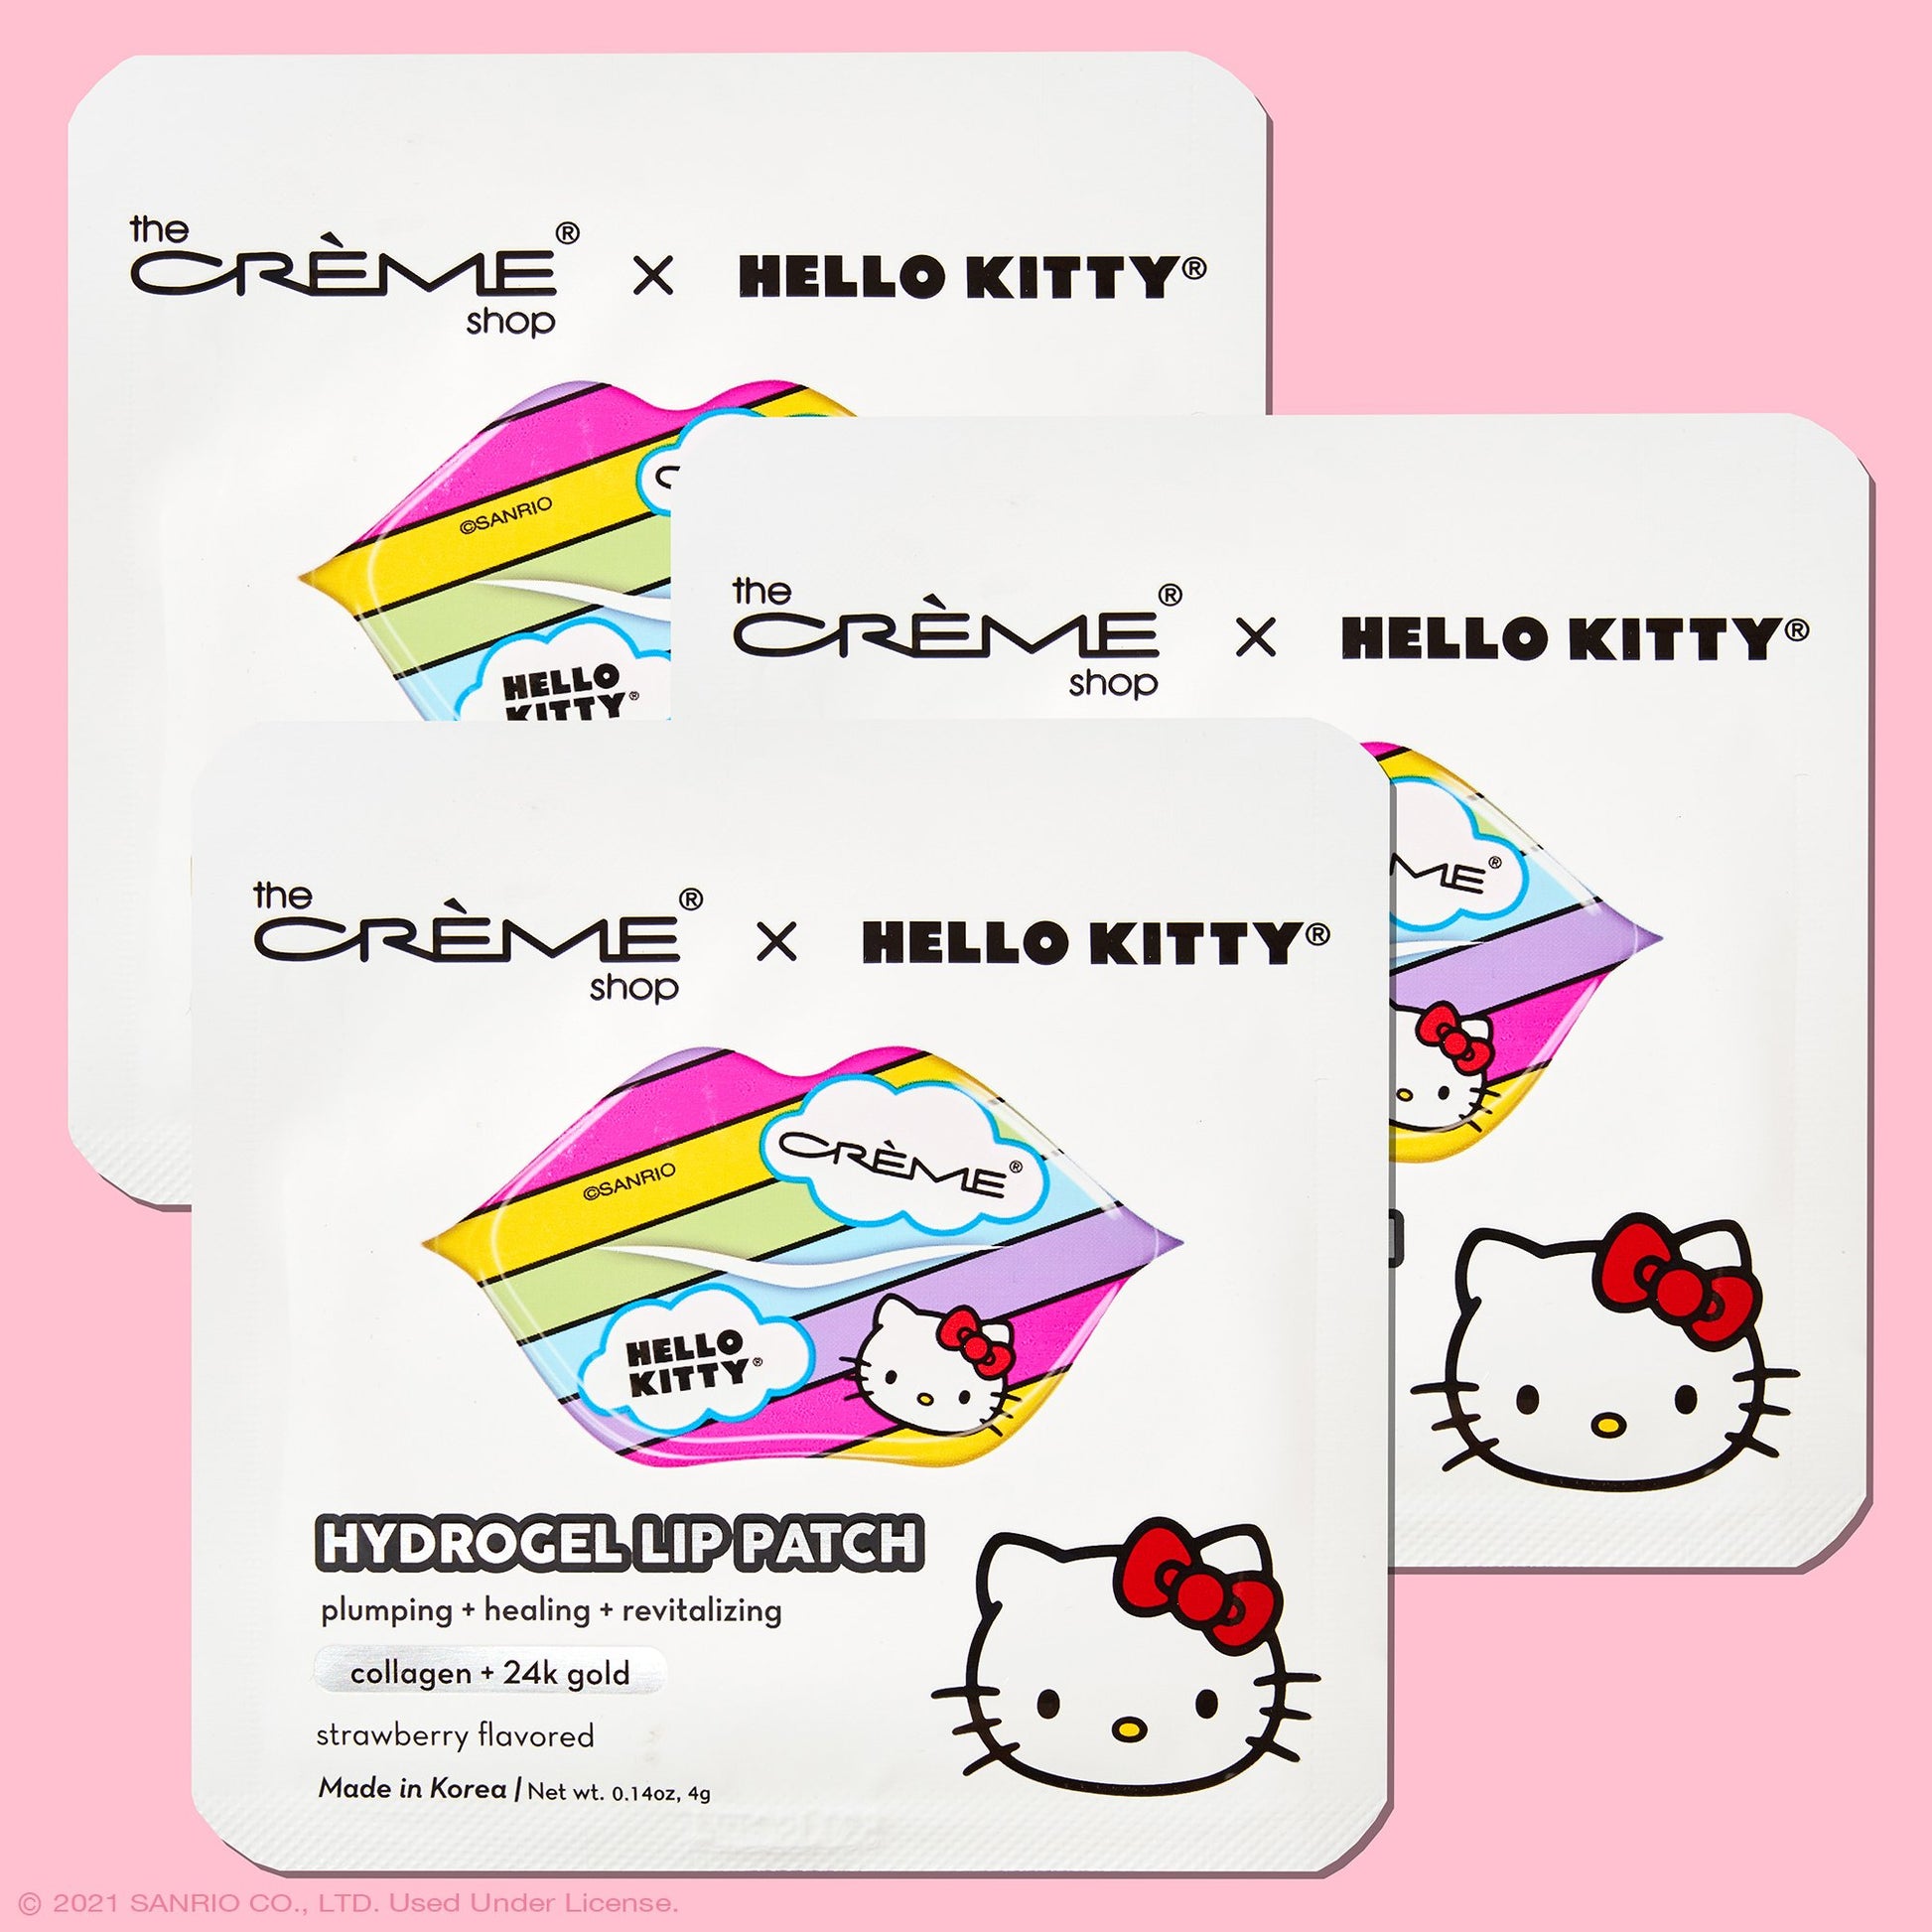 Hello Kitty Hydrogel Lip Patch | Strawberry Flavored Lip Patches The Crème Shop x Sanrio 3 Pack 